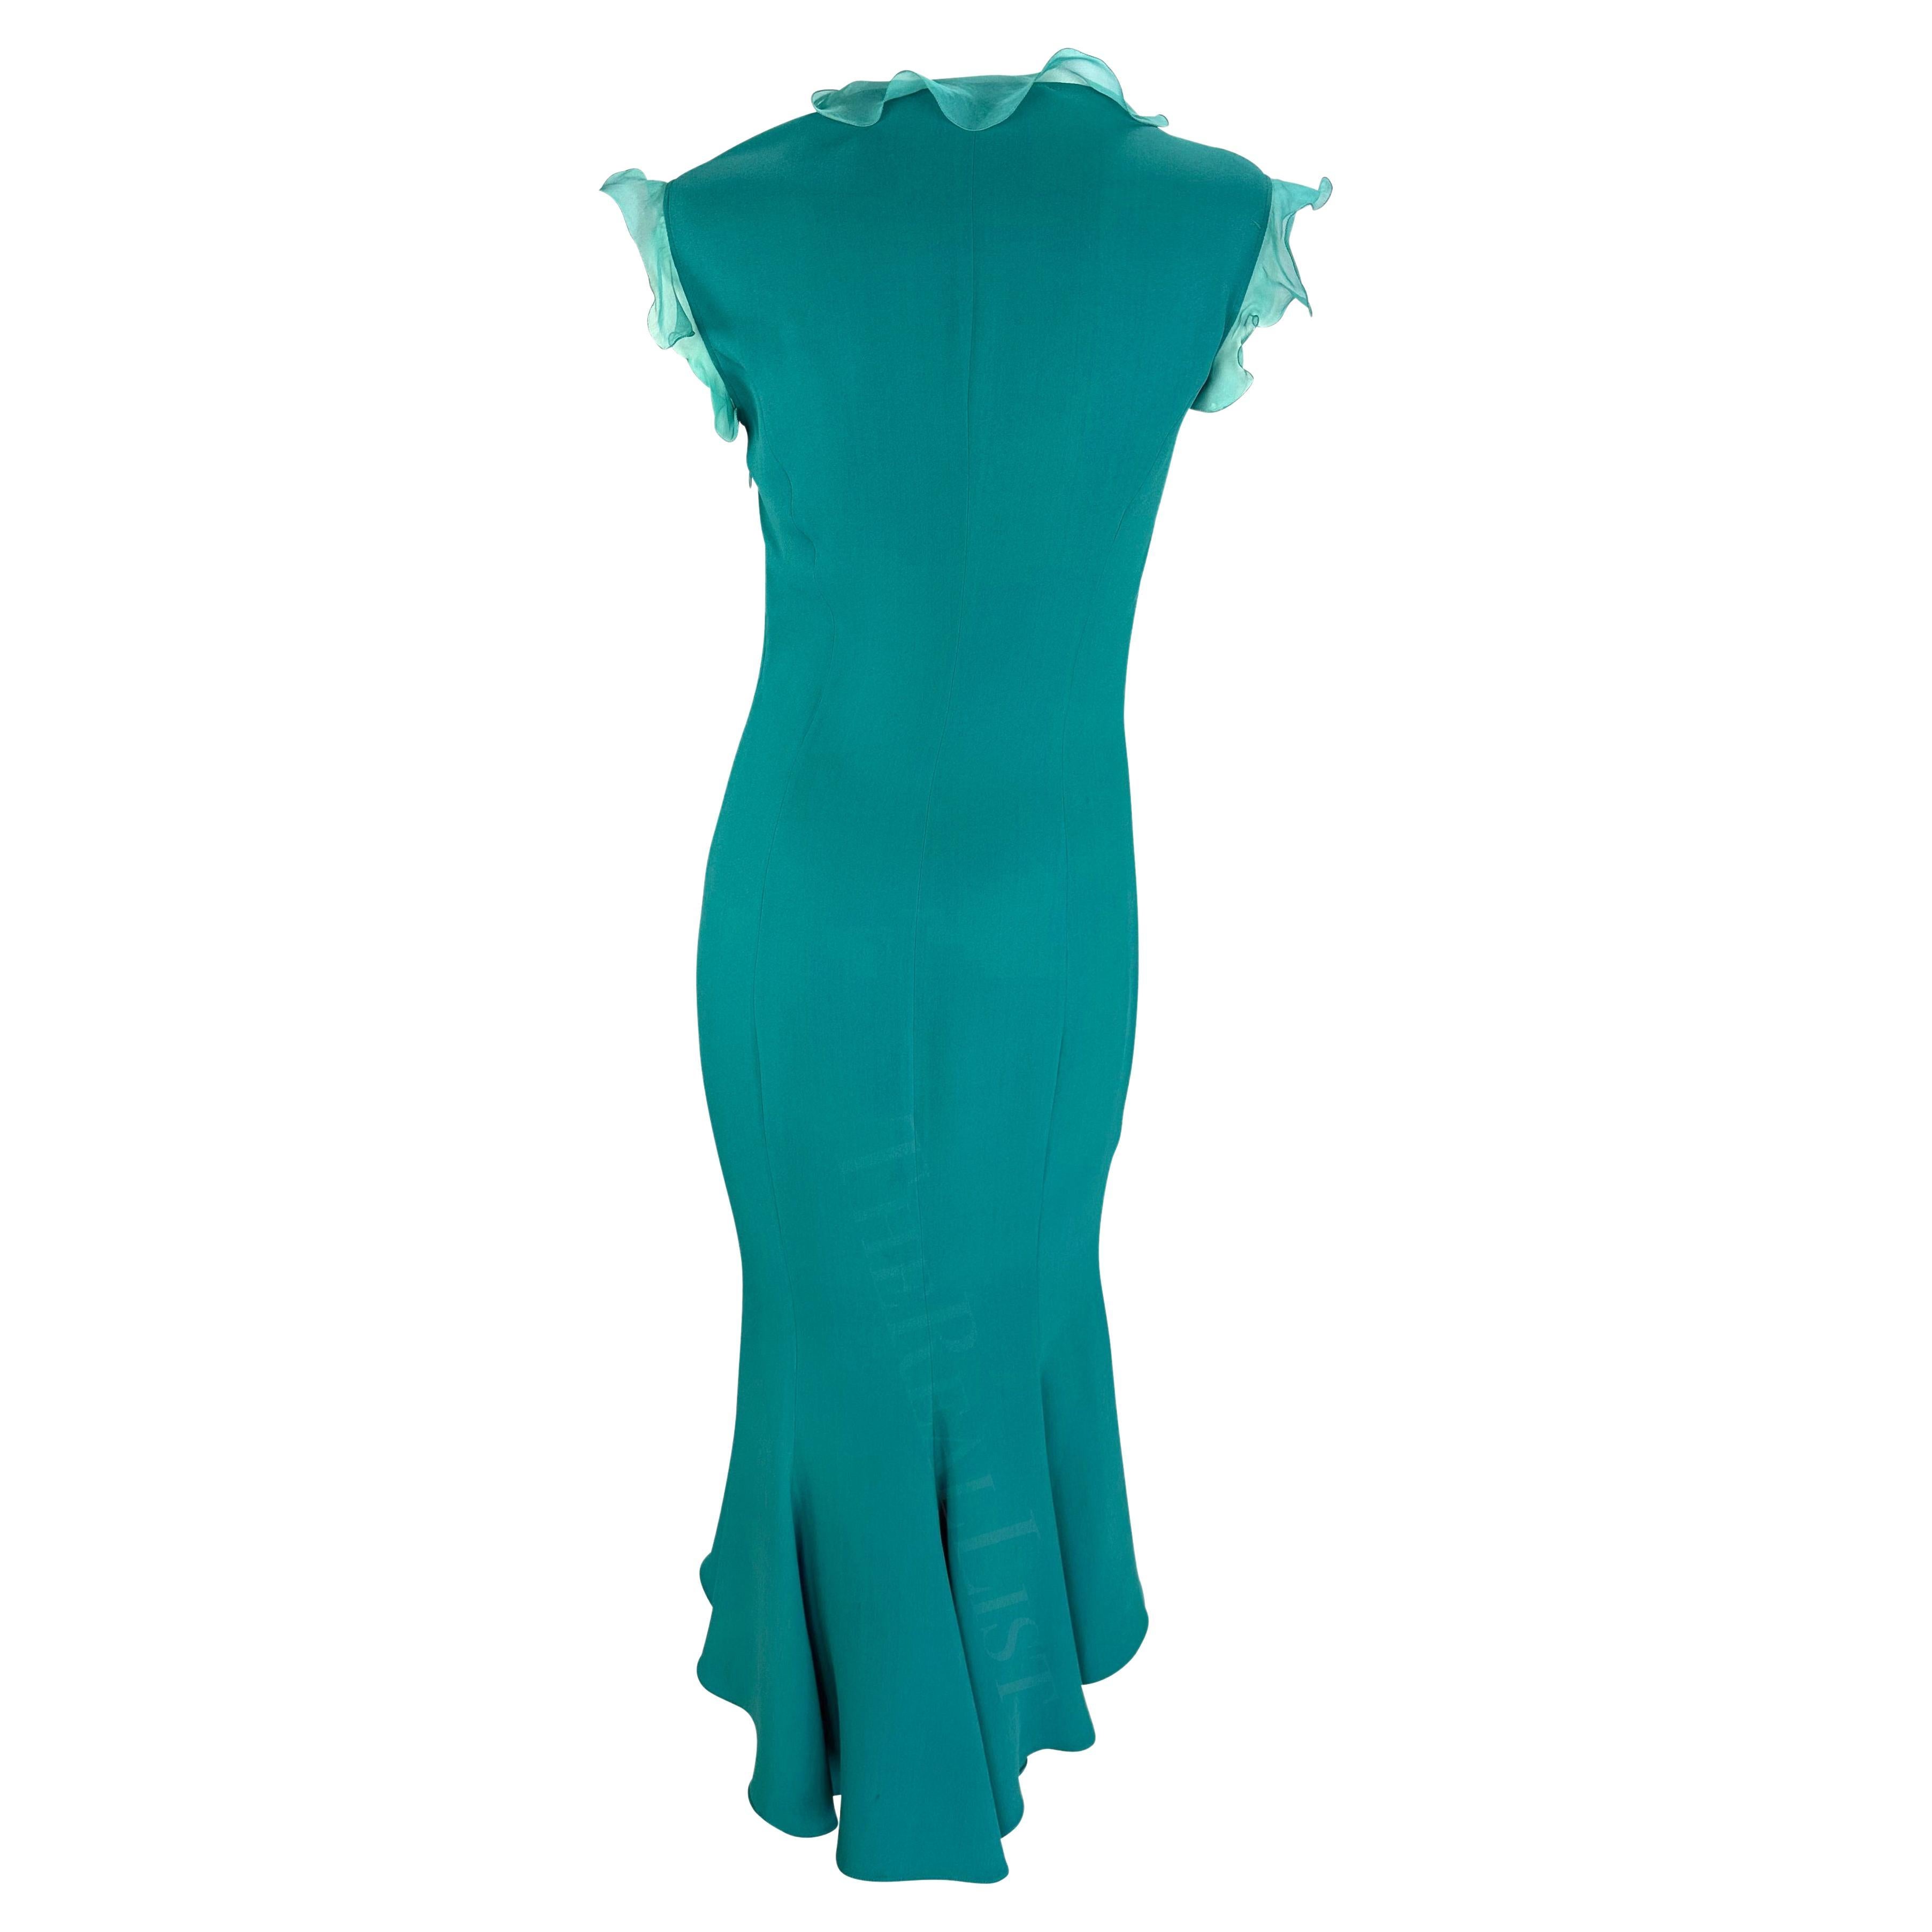 Early 2000s Emanuel Ungaro Turquoise Ruffle Midi Dress In Good Condition For Sale In West Hollywood, CA